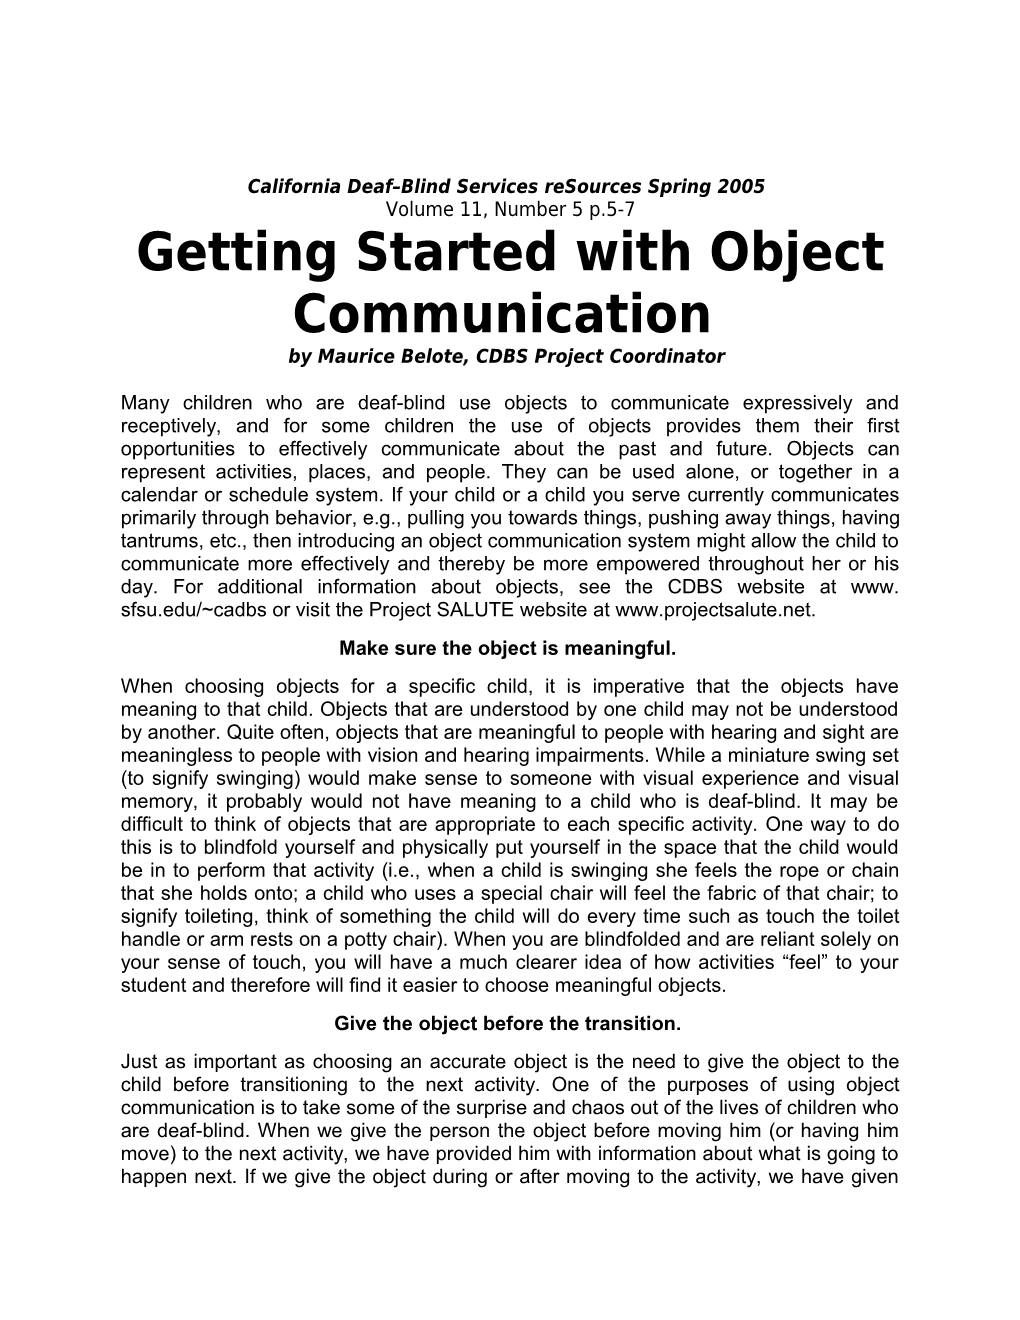 Getting Started with Object Communication